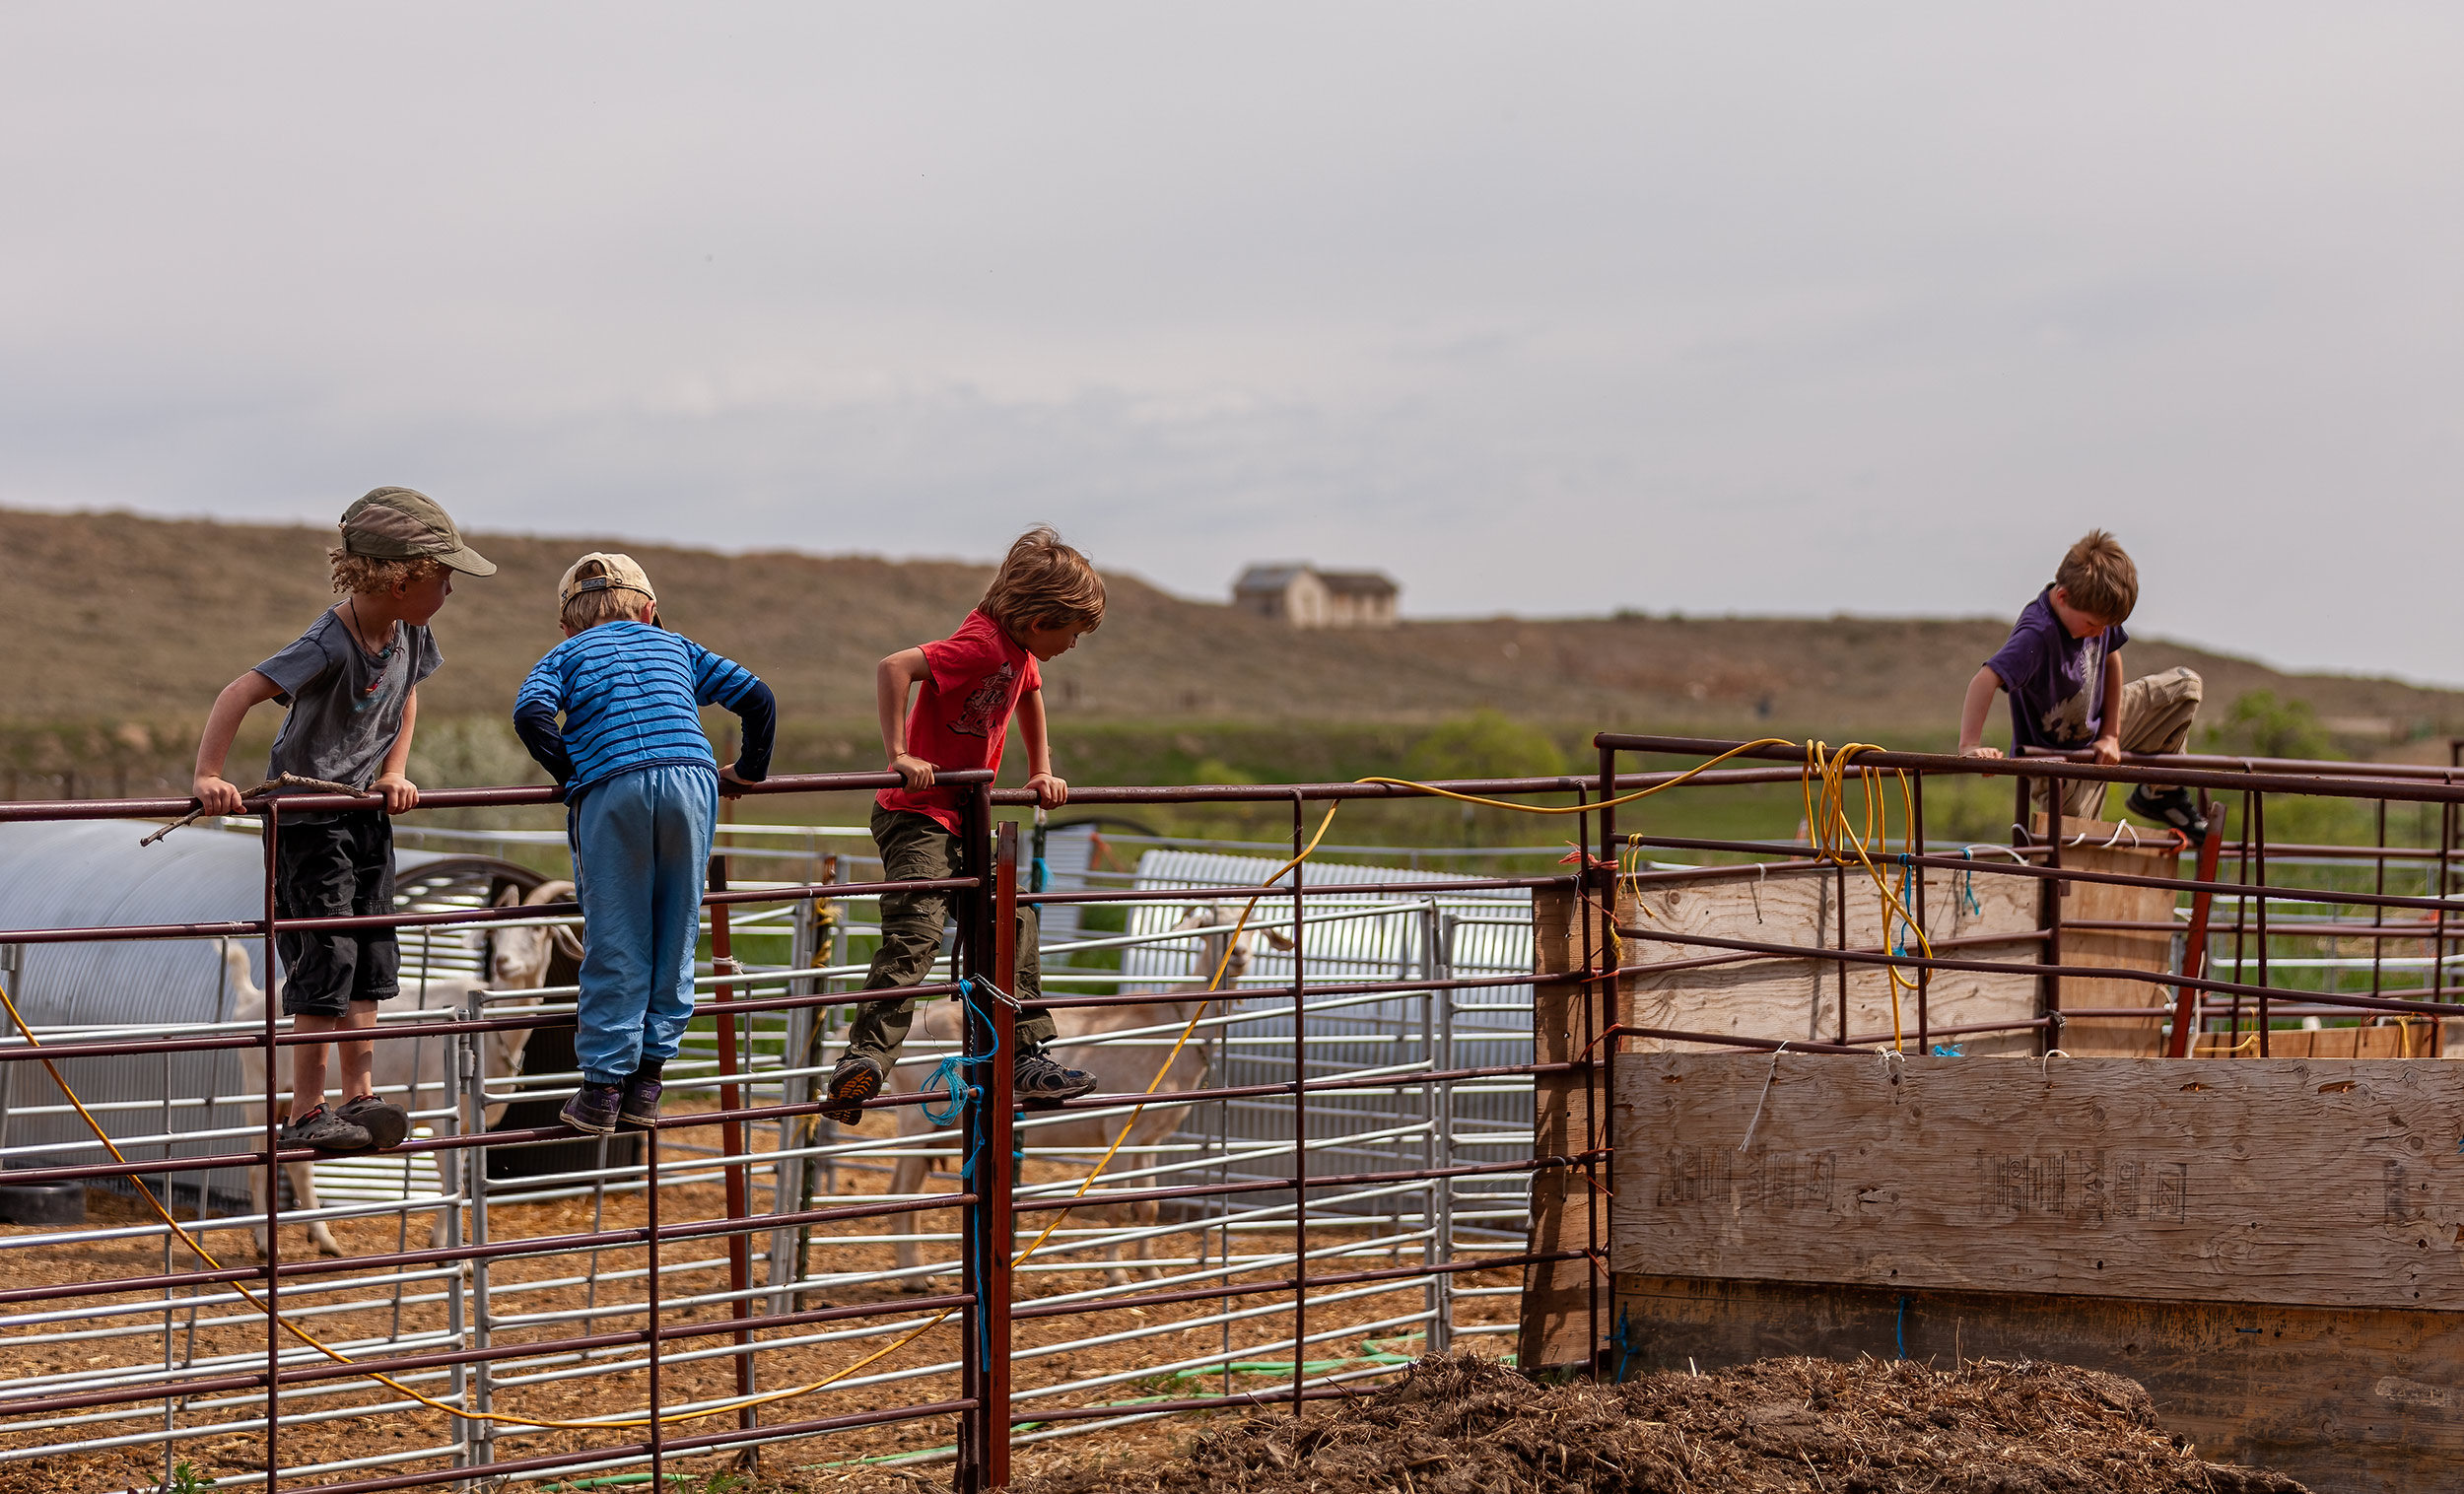 Children playing on cattle panels. Livestock photography